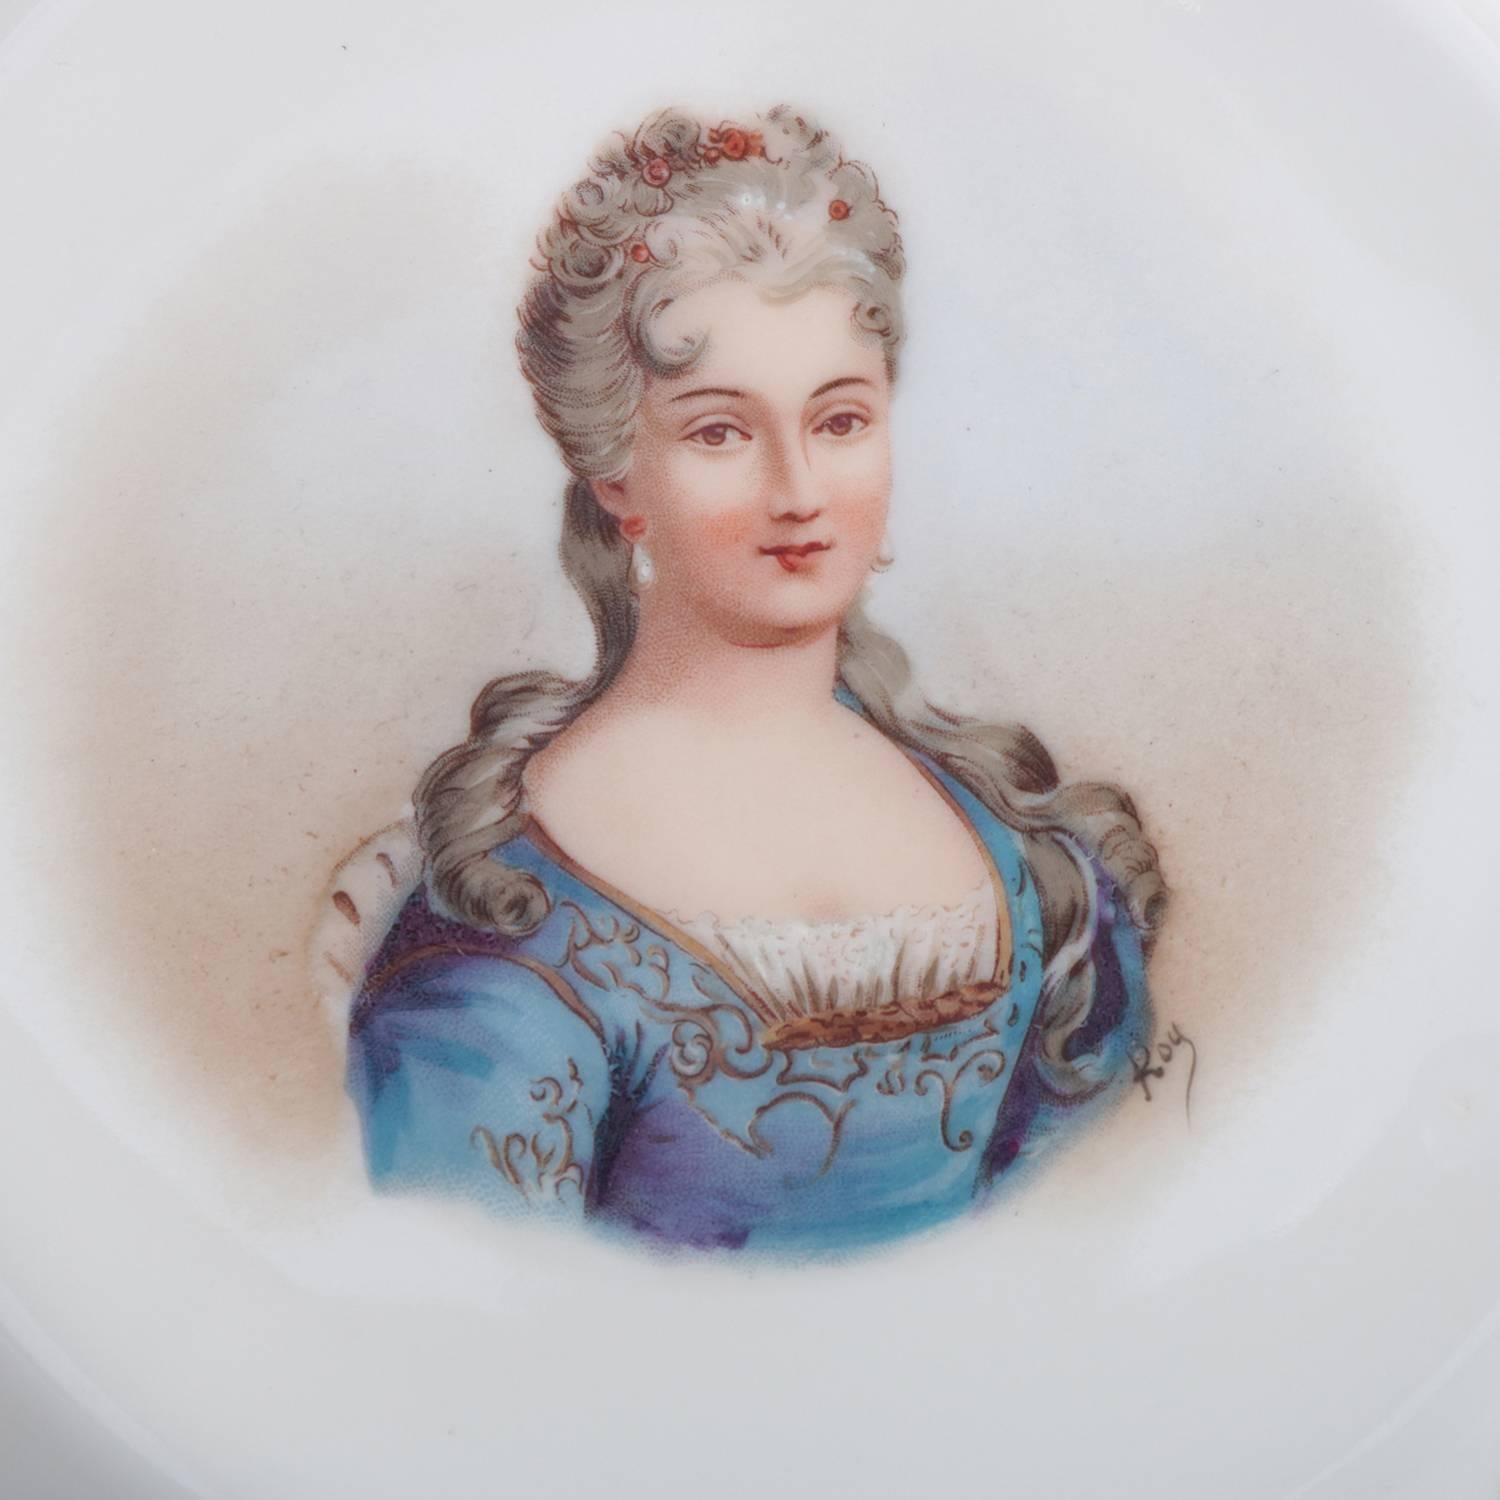 Antique French Sevres porcelain hand painted porcelain portrait plate features central portrait artist signed Roy lower right, scalloped border with floral reserves and gilt foliate and scroll accents, en verso with Sevres double 